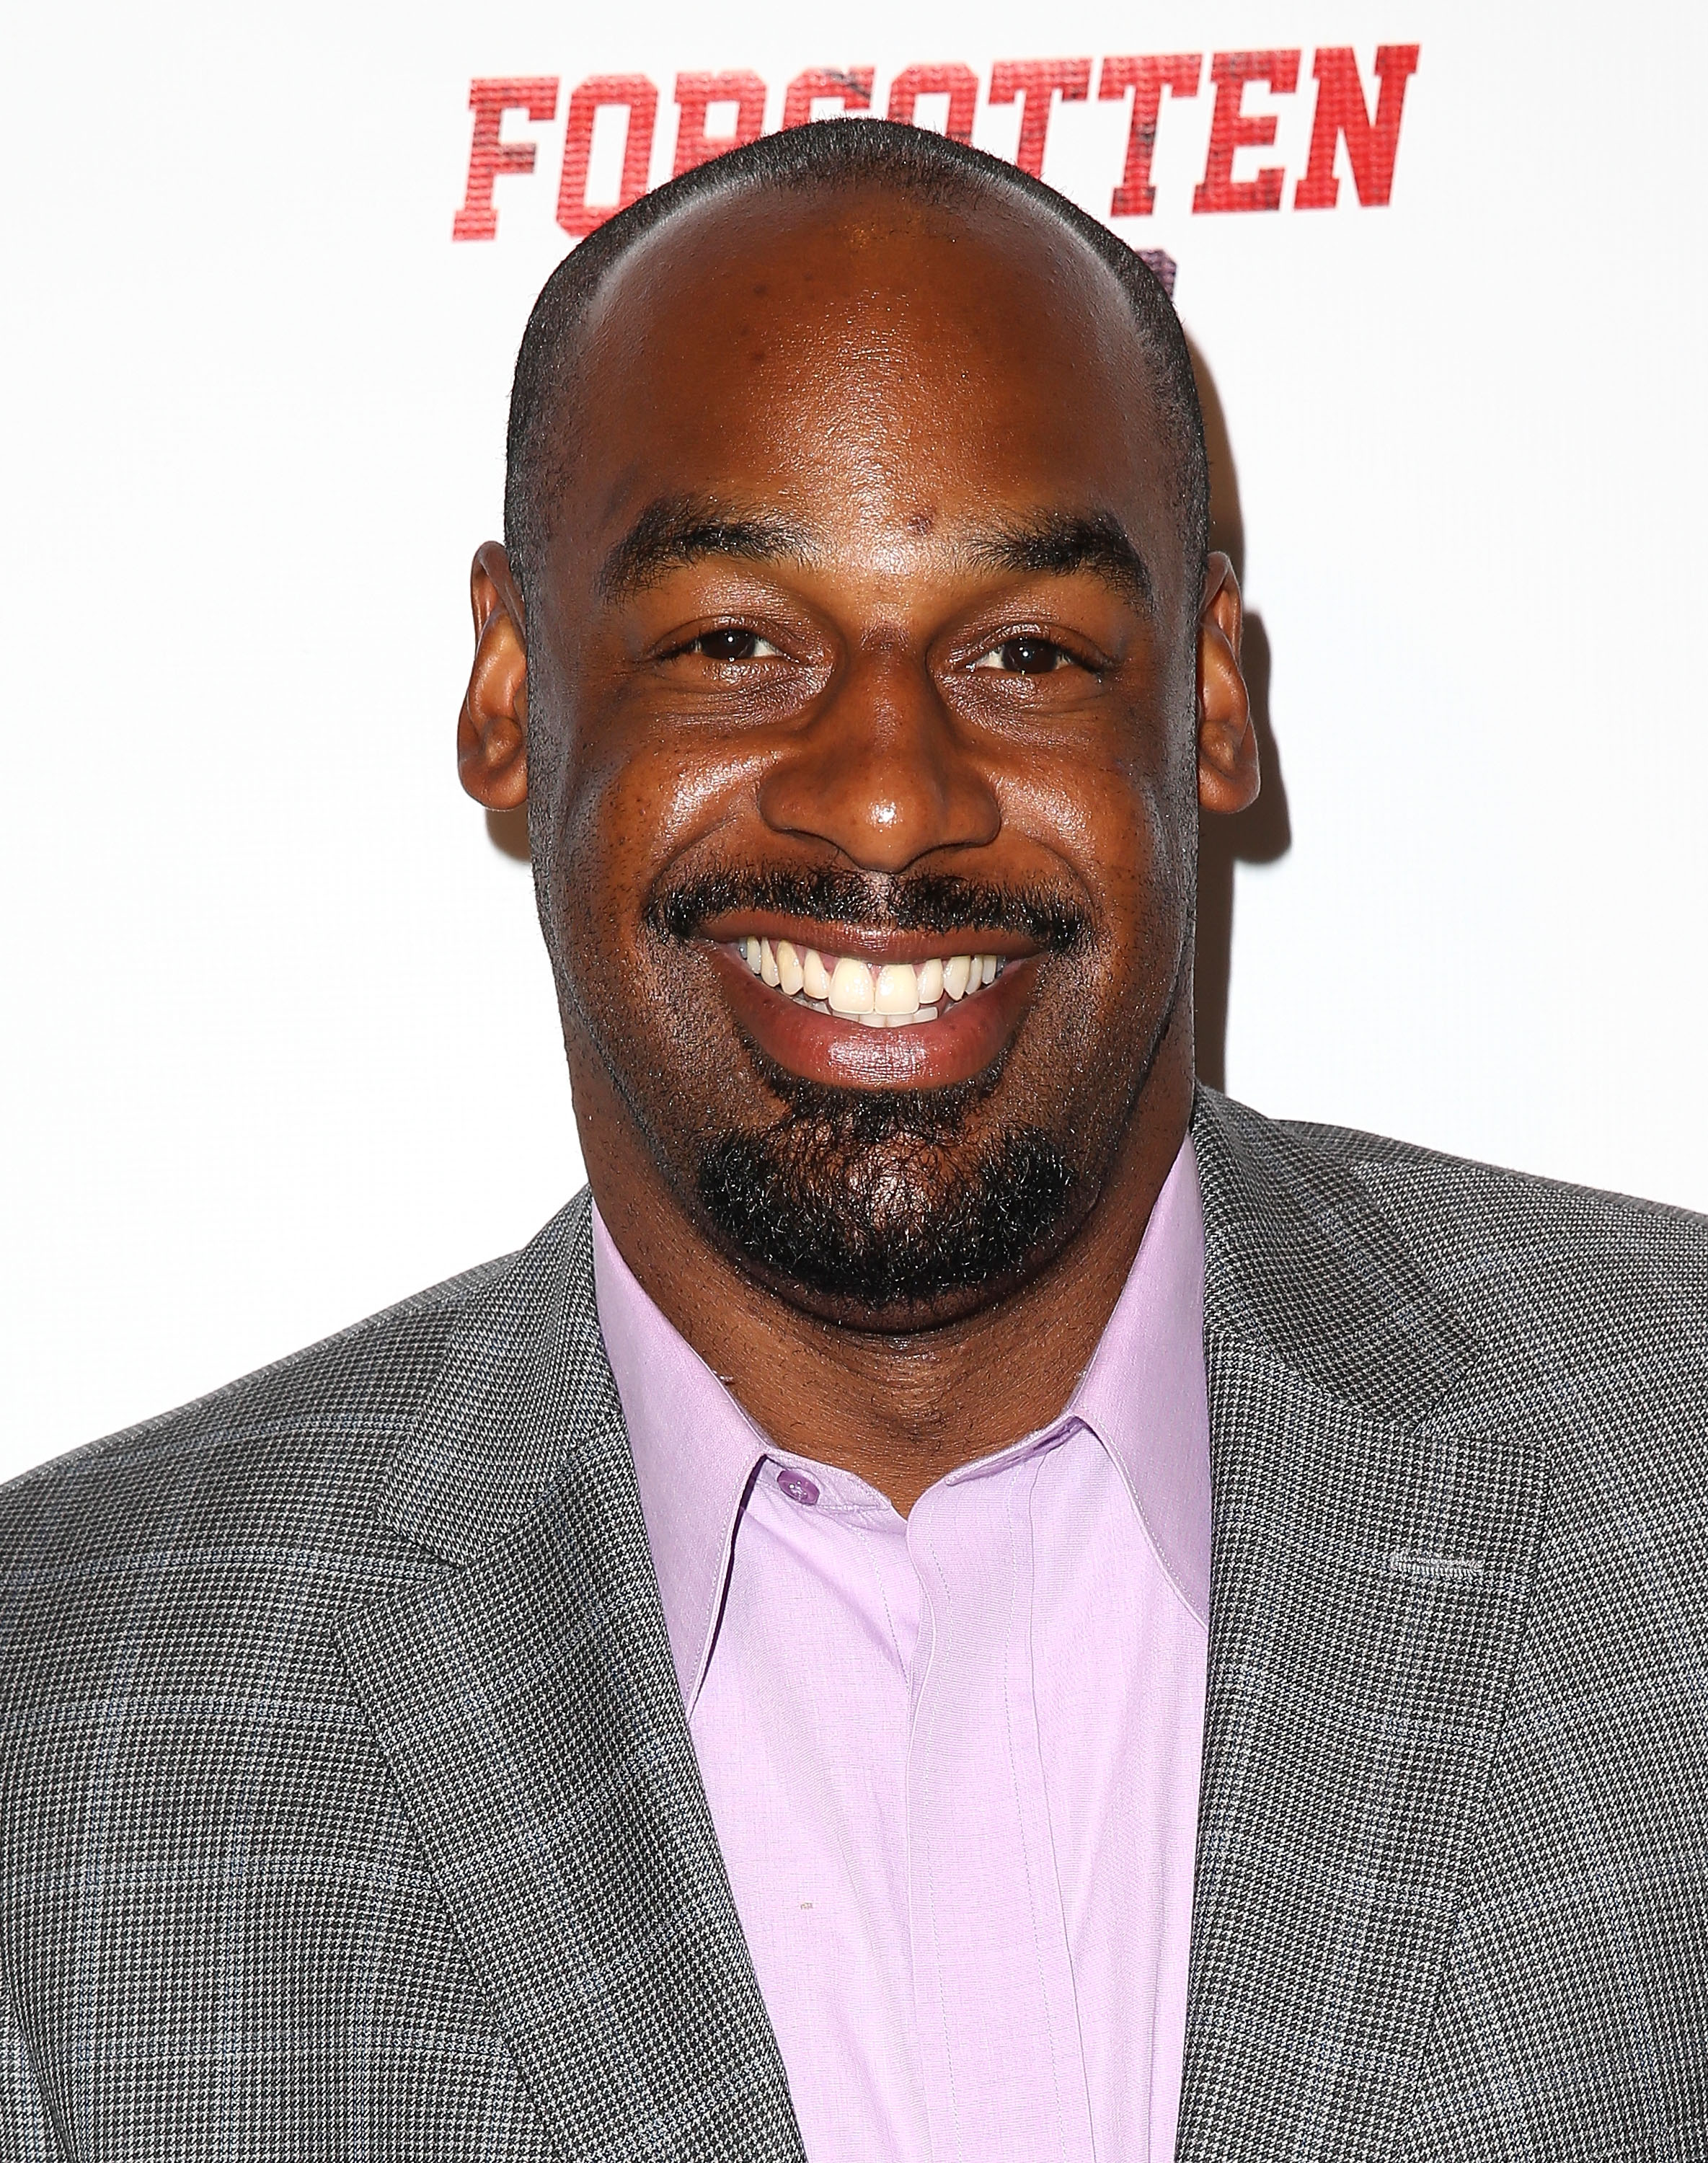 Former professional football player Donovan McNabb attends the 'Forgotten Four: The Integration Of Pro Football' screening presented by EPIX &amp; UCLA at Royce Hall, UCLA on September 9, 2014 in Westwood, California. (Imeh Akpanudosen—Getty Images for EPIX)